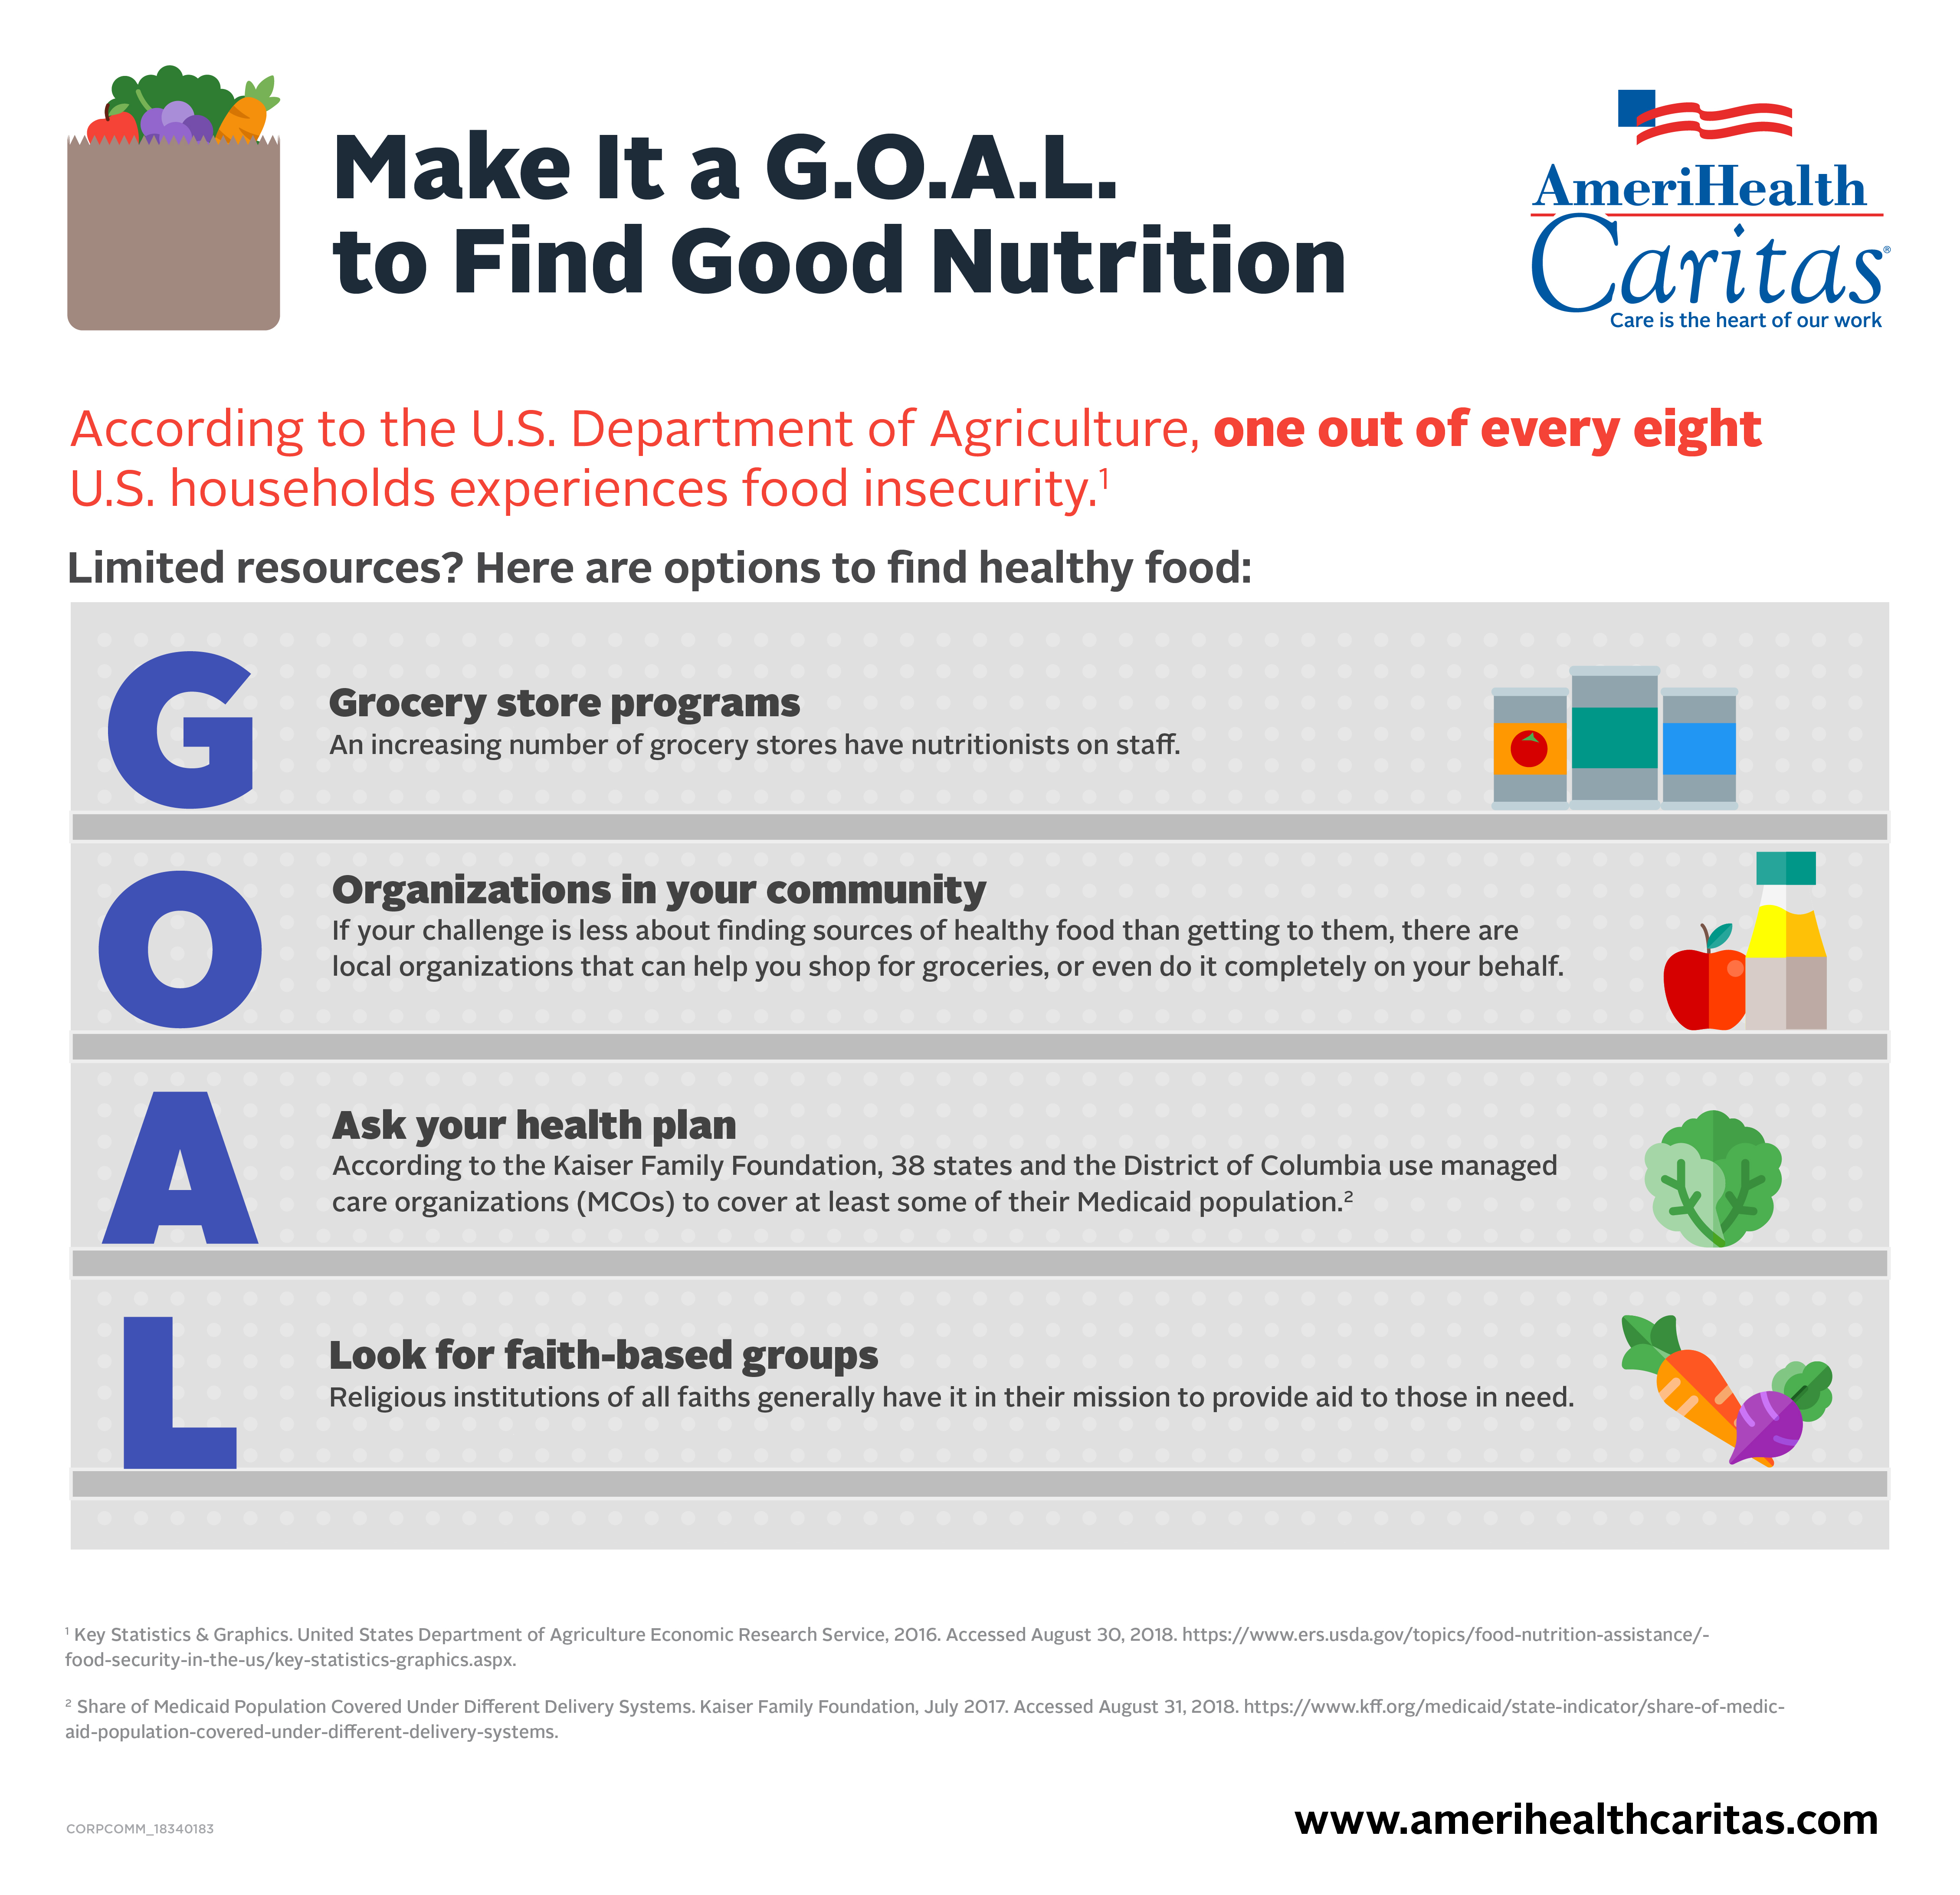 Food! How Do We Ensure Good Nutrition for All?